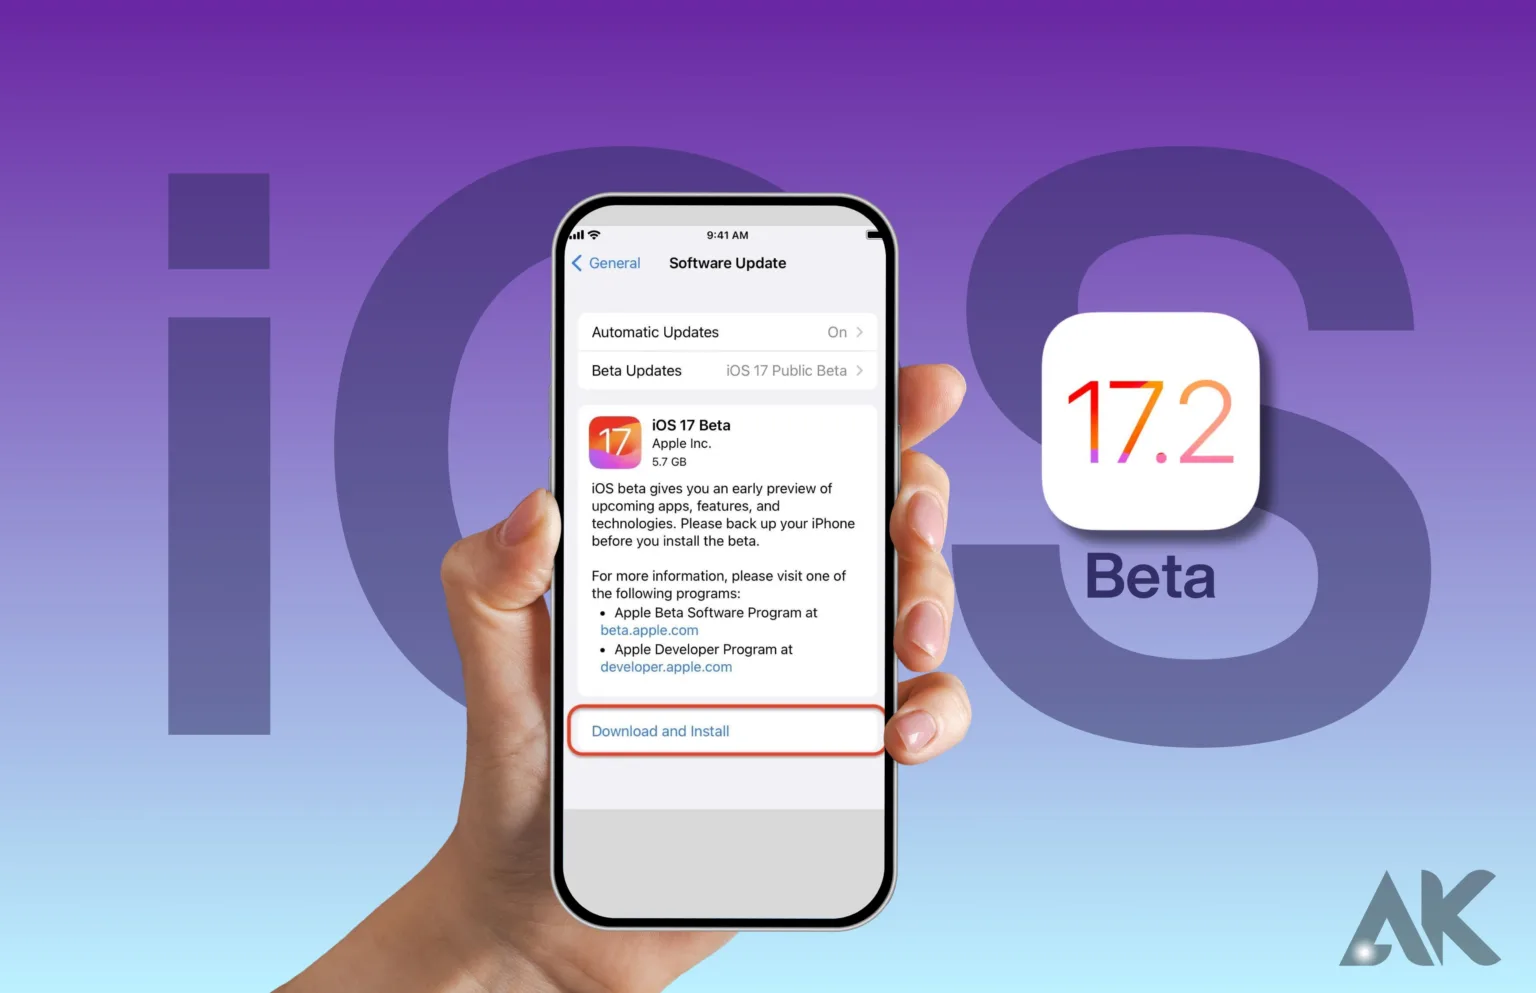 How to Download and Install the iOS 17.2 Beta